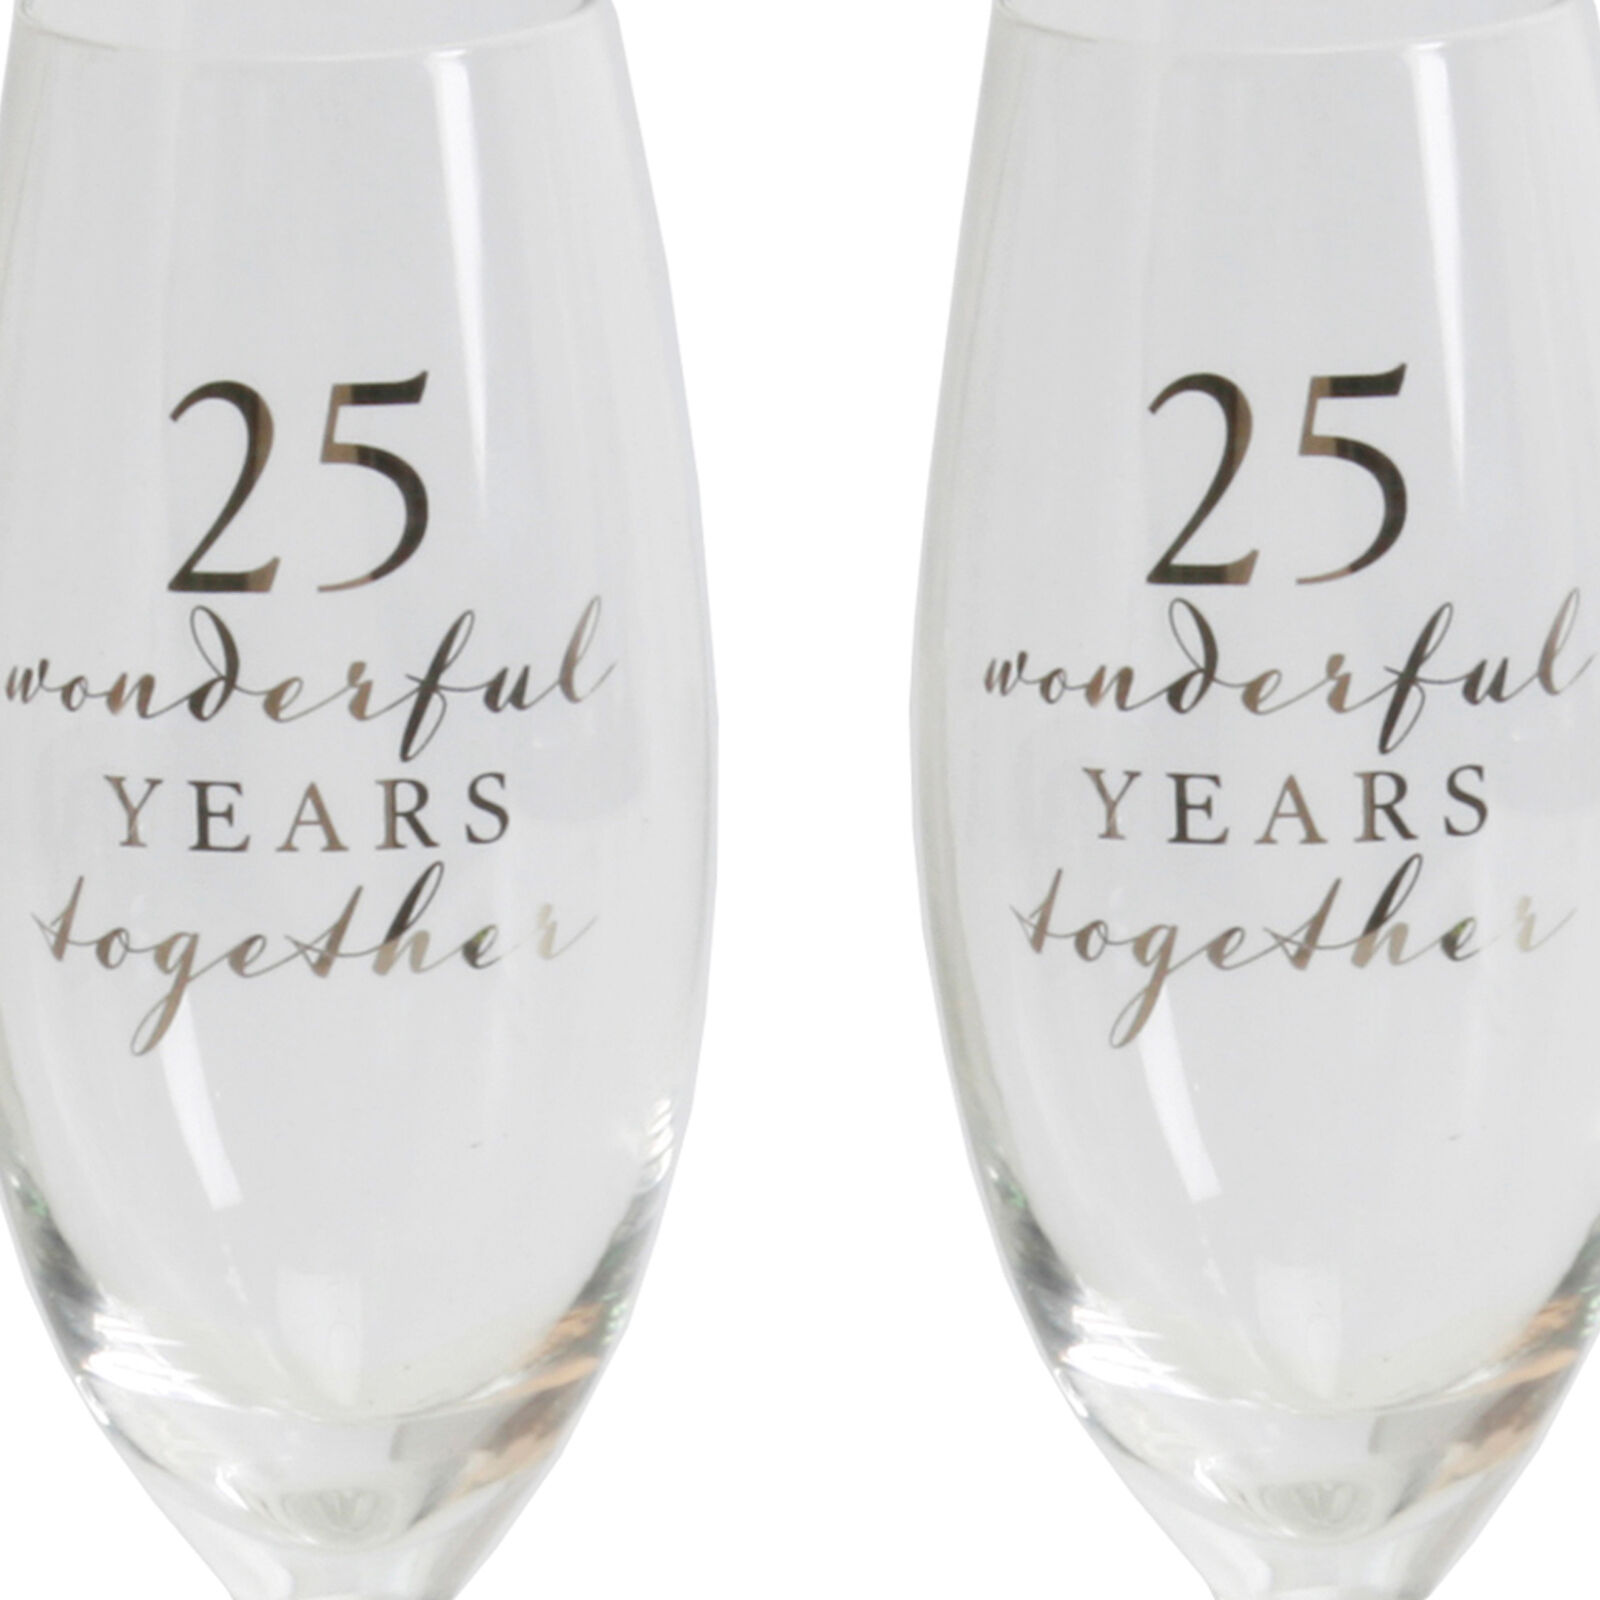 Amore Set of 2 Gift Boxed Champagne Flutes - 25th Anniversary